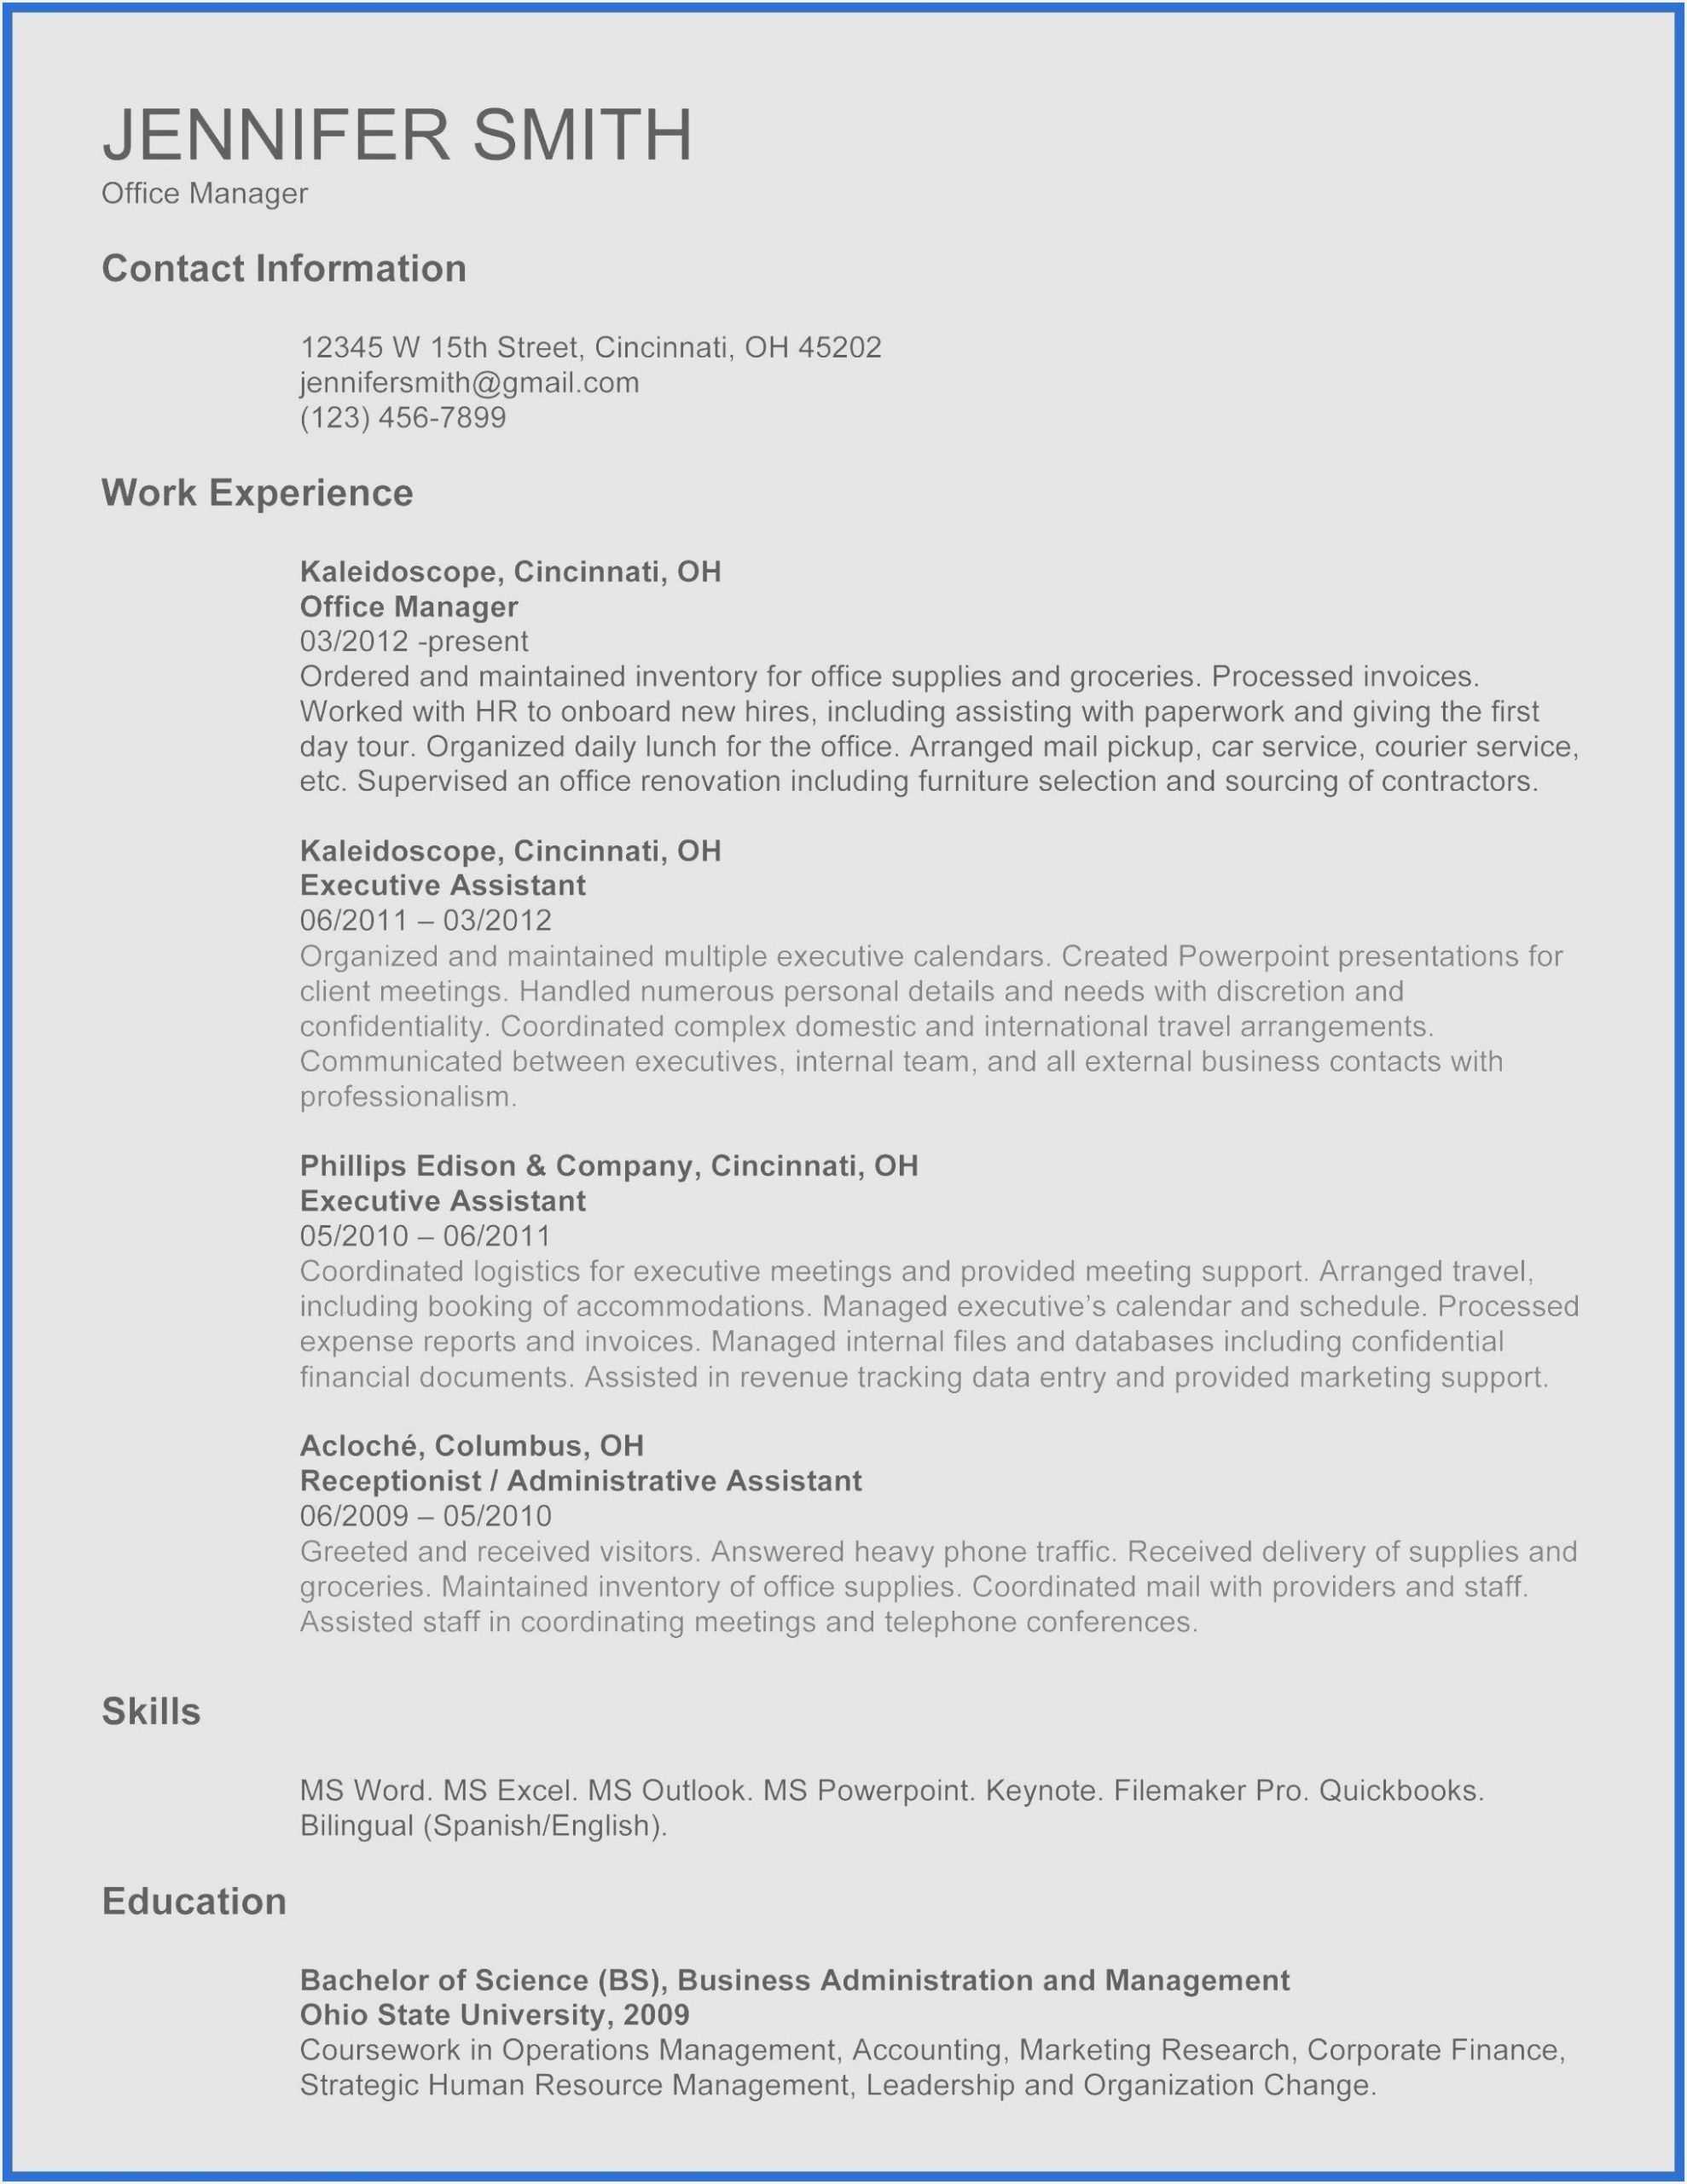 Resume Templates For Ms Word 2010 – Resume Sample : Resume For Resume Templates Word 2010